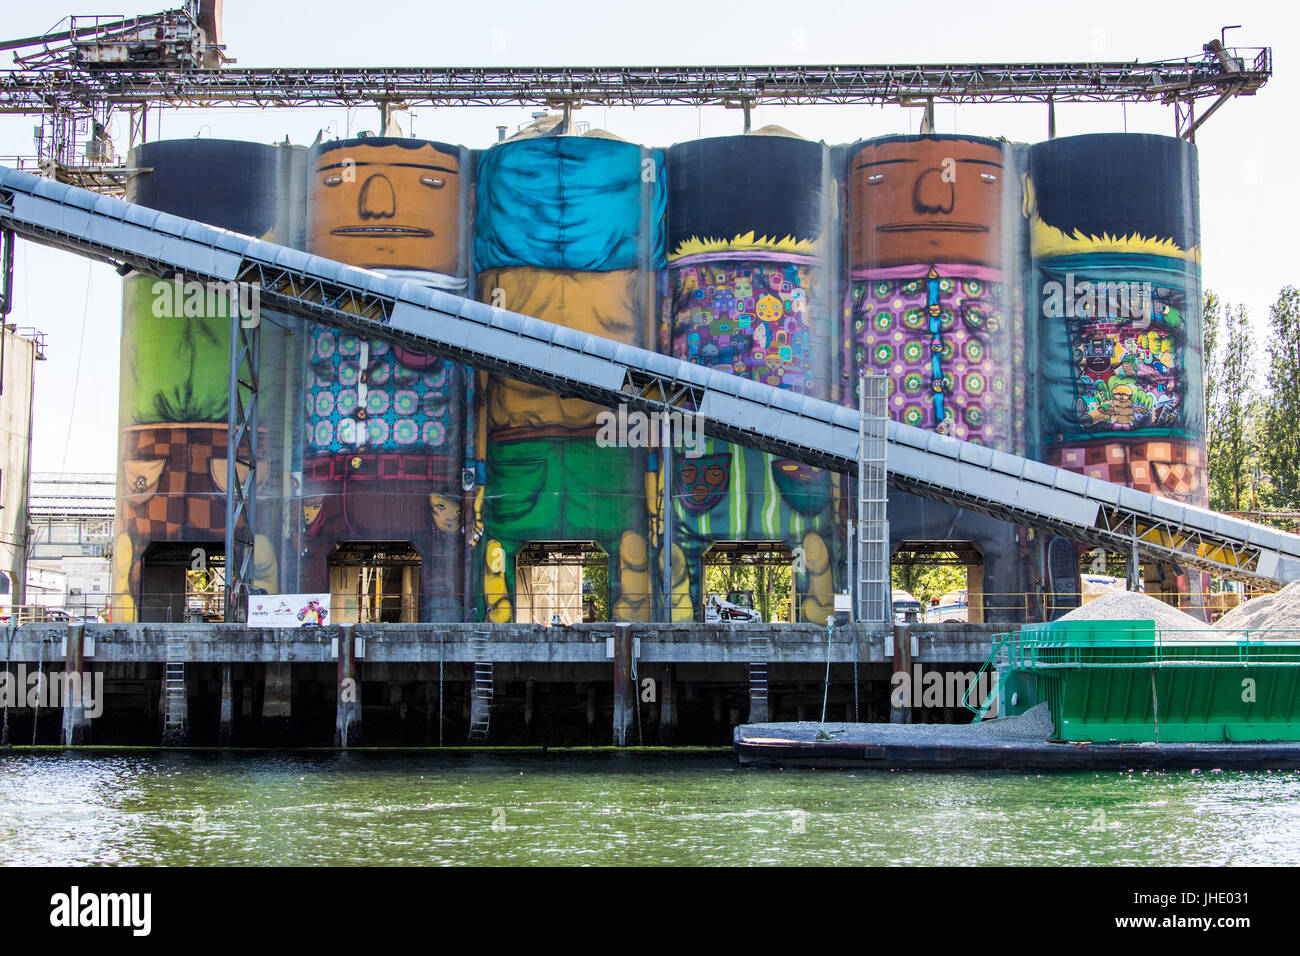 'Giants', public art made from Silos by Os Gemeos, Granville Island, Vancouver, British Columbia, Canada Stock Photo